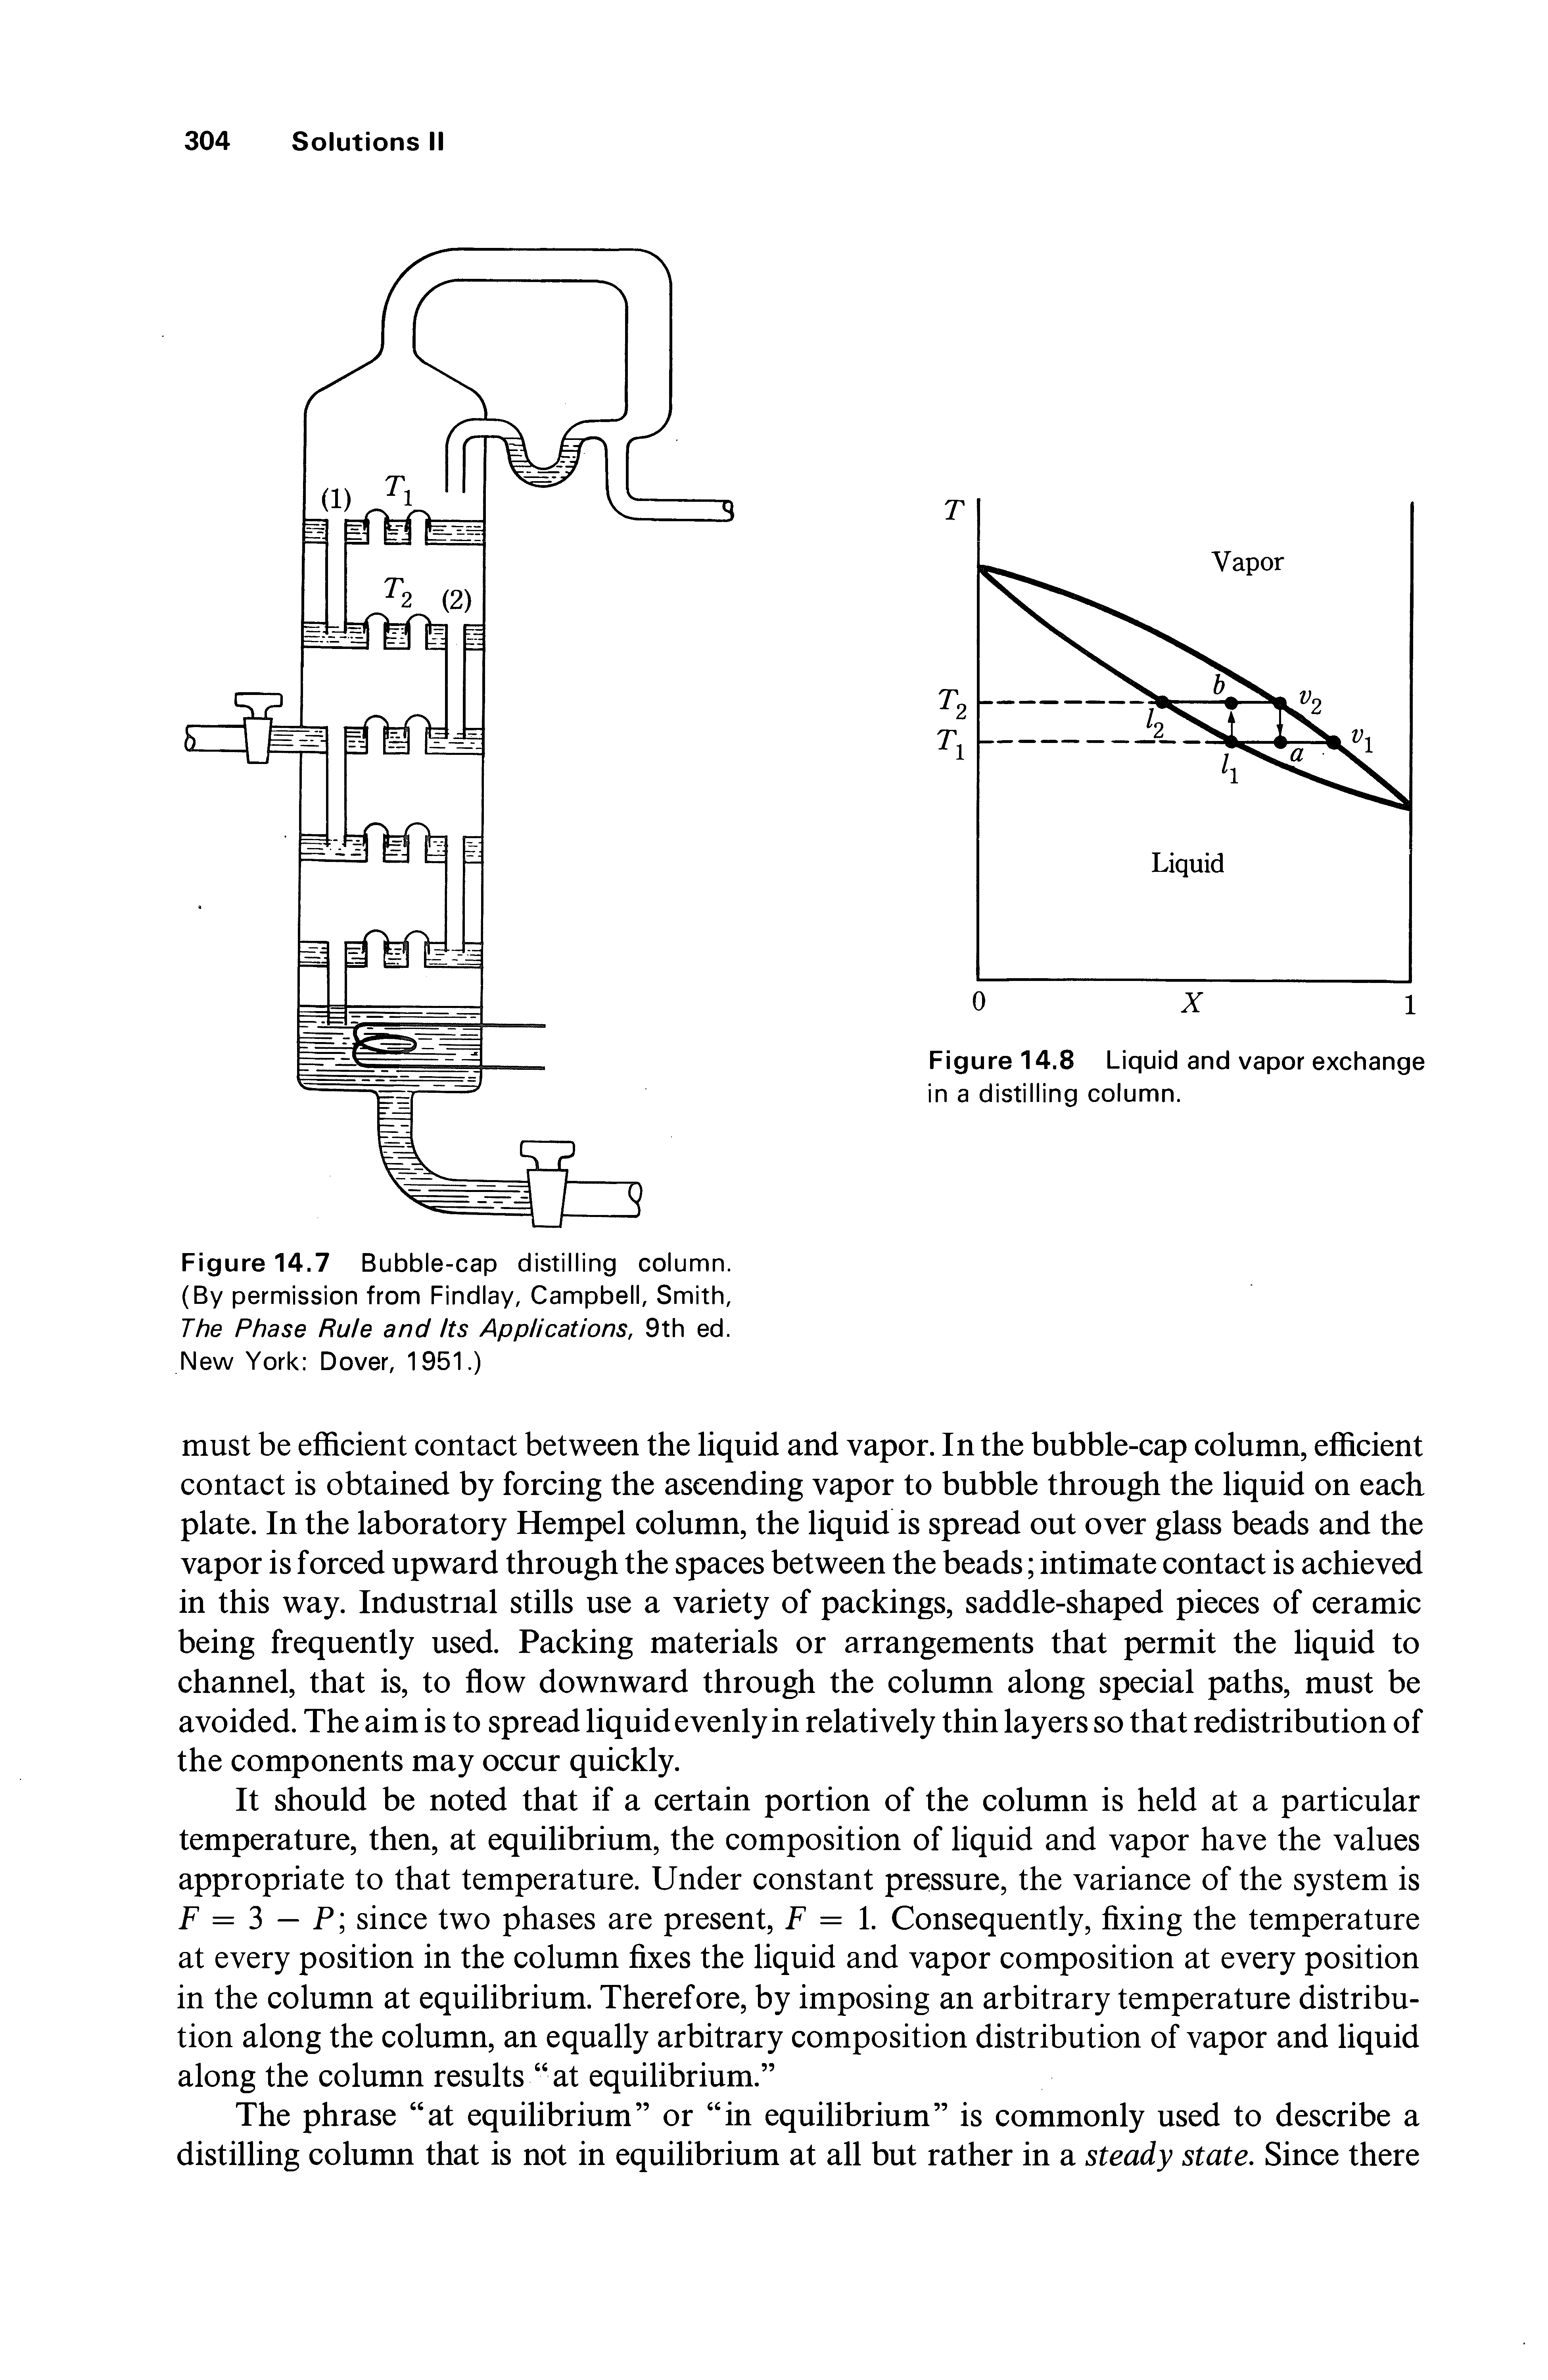 Figure 14.7 Bubble-cap distilling column. (By permission from Findlay, Campbell, Smith, The Phase Rule and Its Applications, 9th ed. New York Dover, 1951.)...